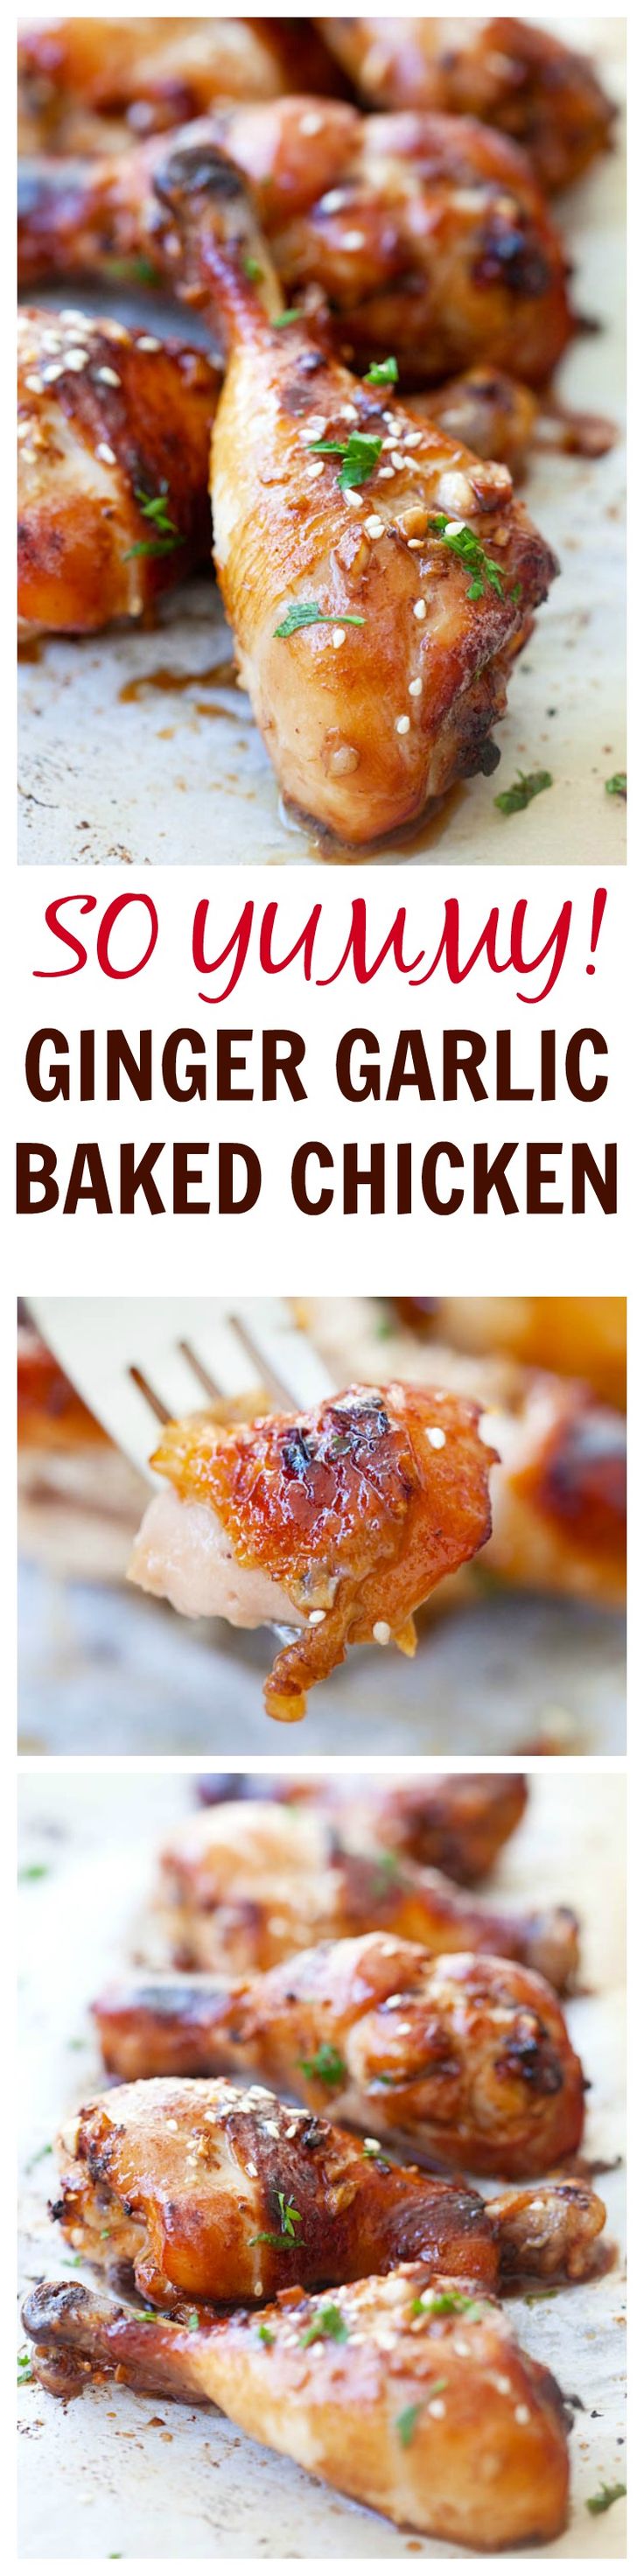 SUPER YUMMY ginger garlic baked chicken marinated with ginger, garlic, soy sauce and honey. EASY and delicious recipe that anyone can make at home | rasamalaysia.com